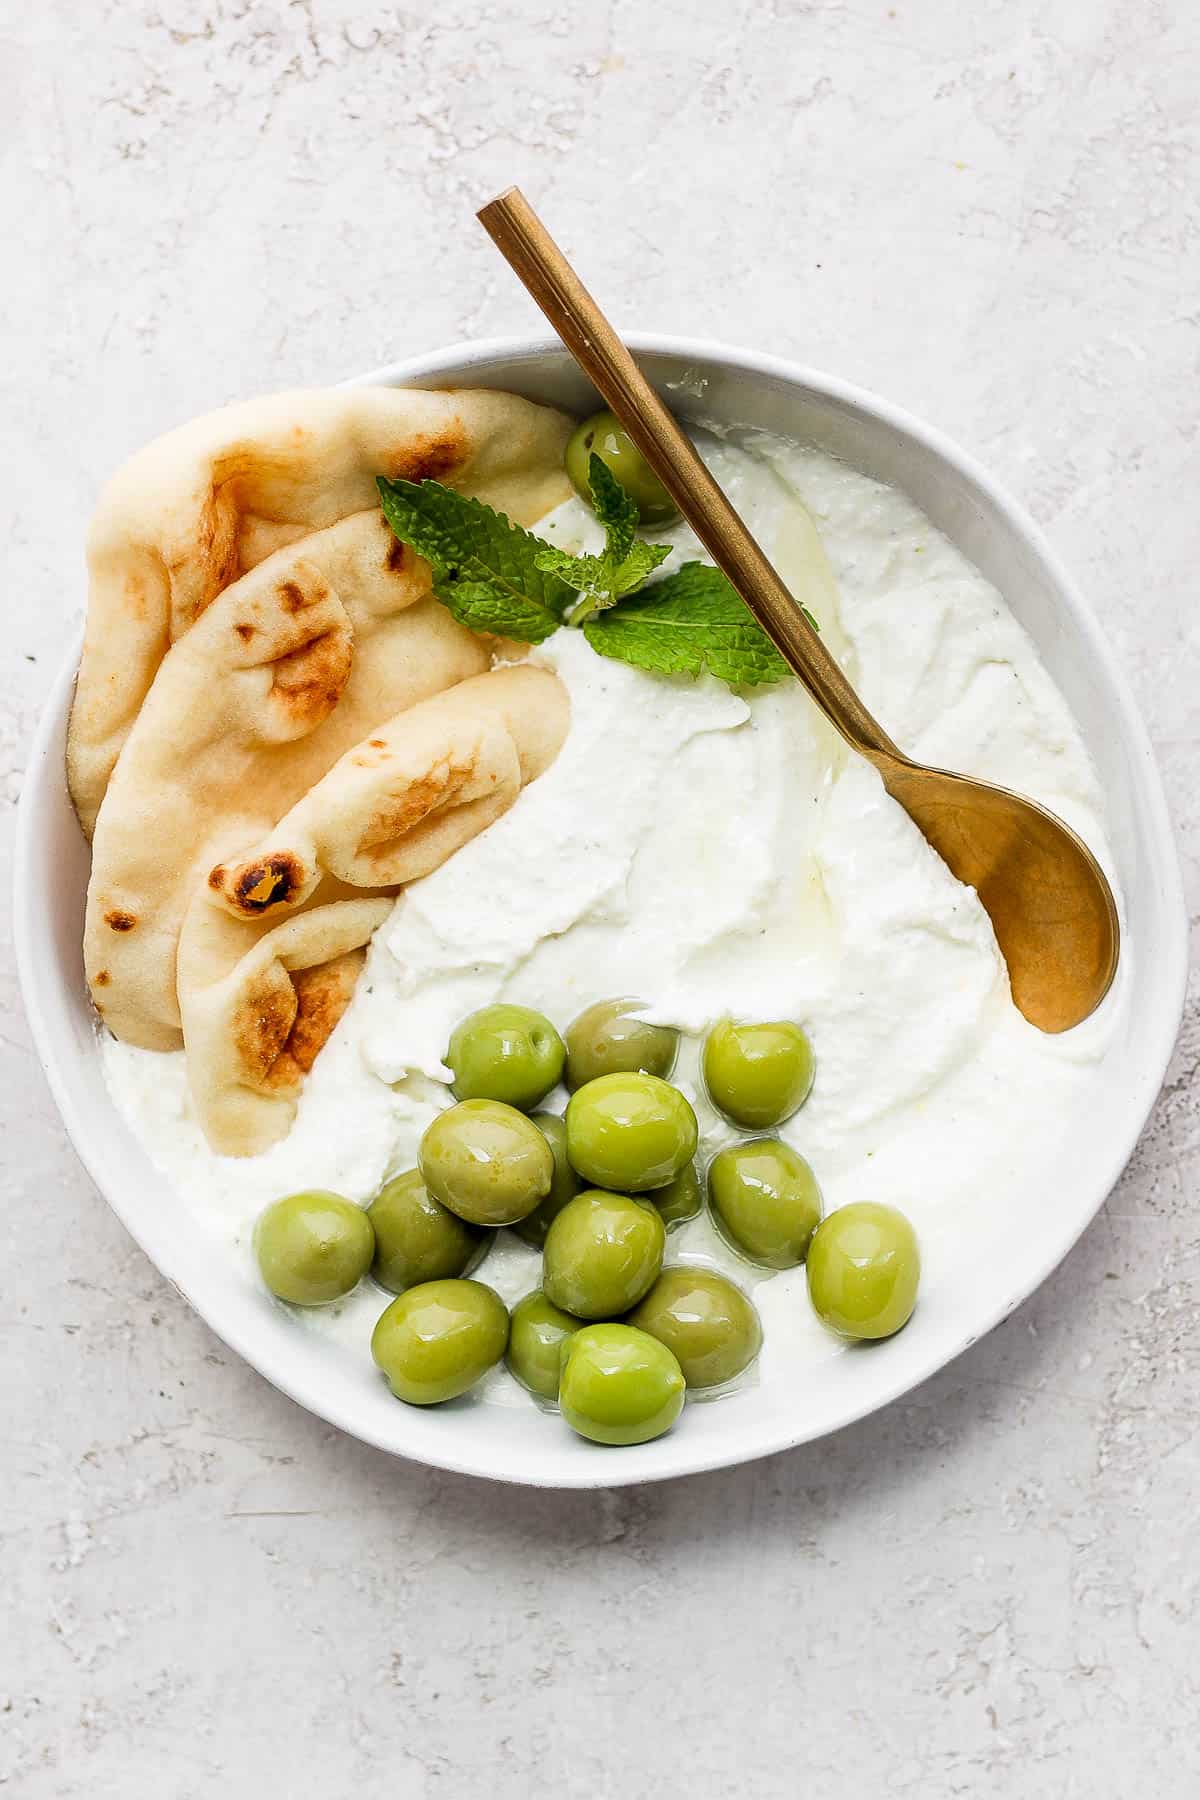 Whipped feta dip in a bowl surrounded by pita bread, olives, and a mint leaf.